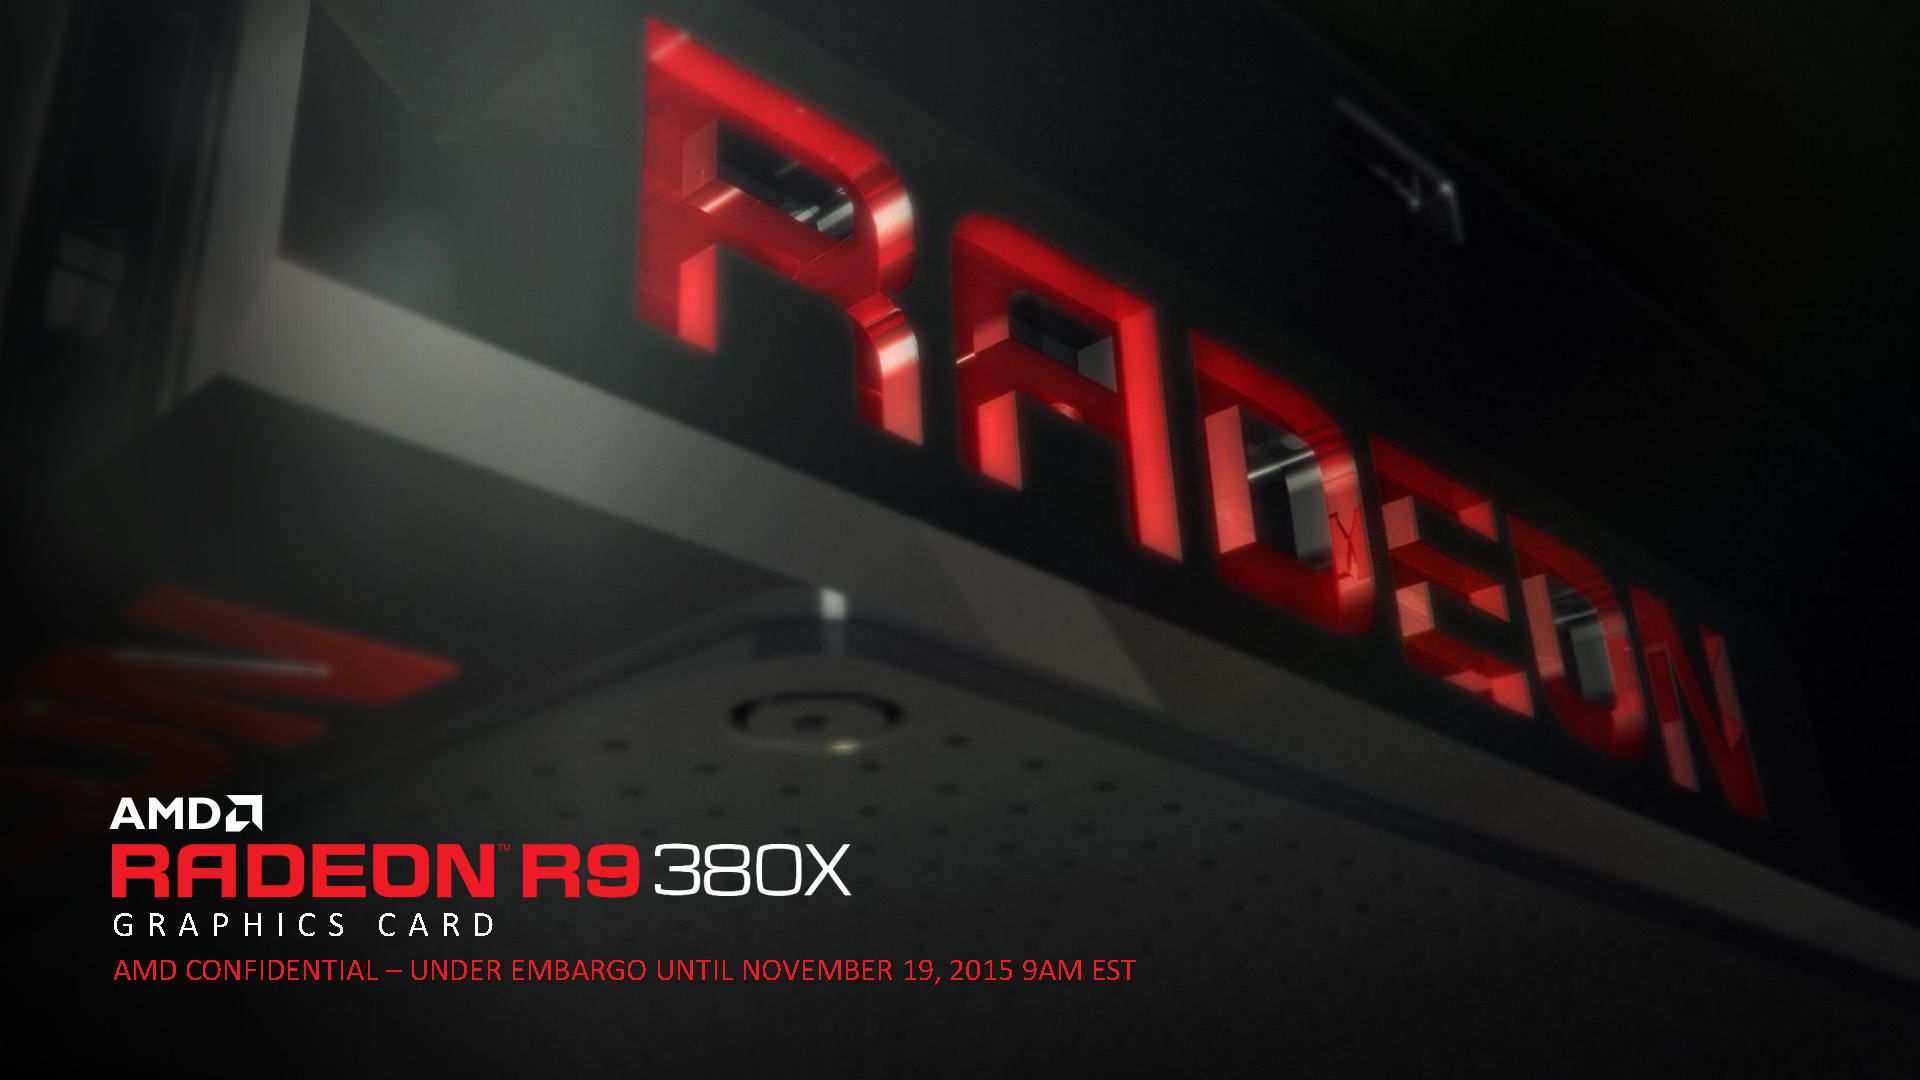 AMD Officially Launches the Radeon R9 380X – Antigua XT Starting at $229